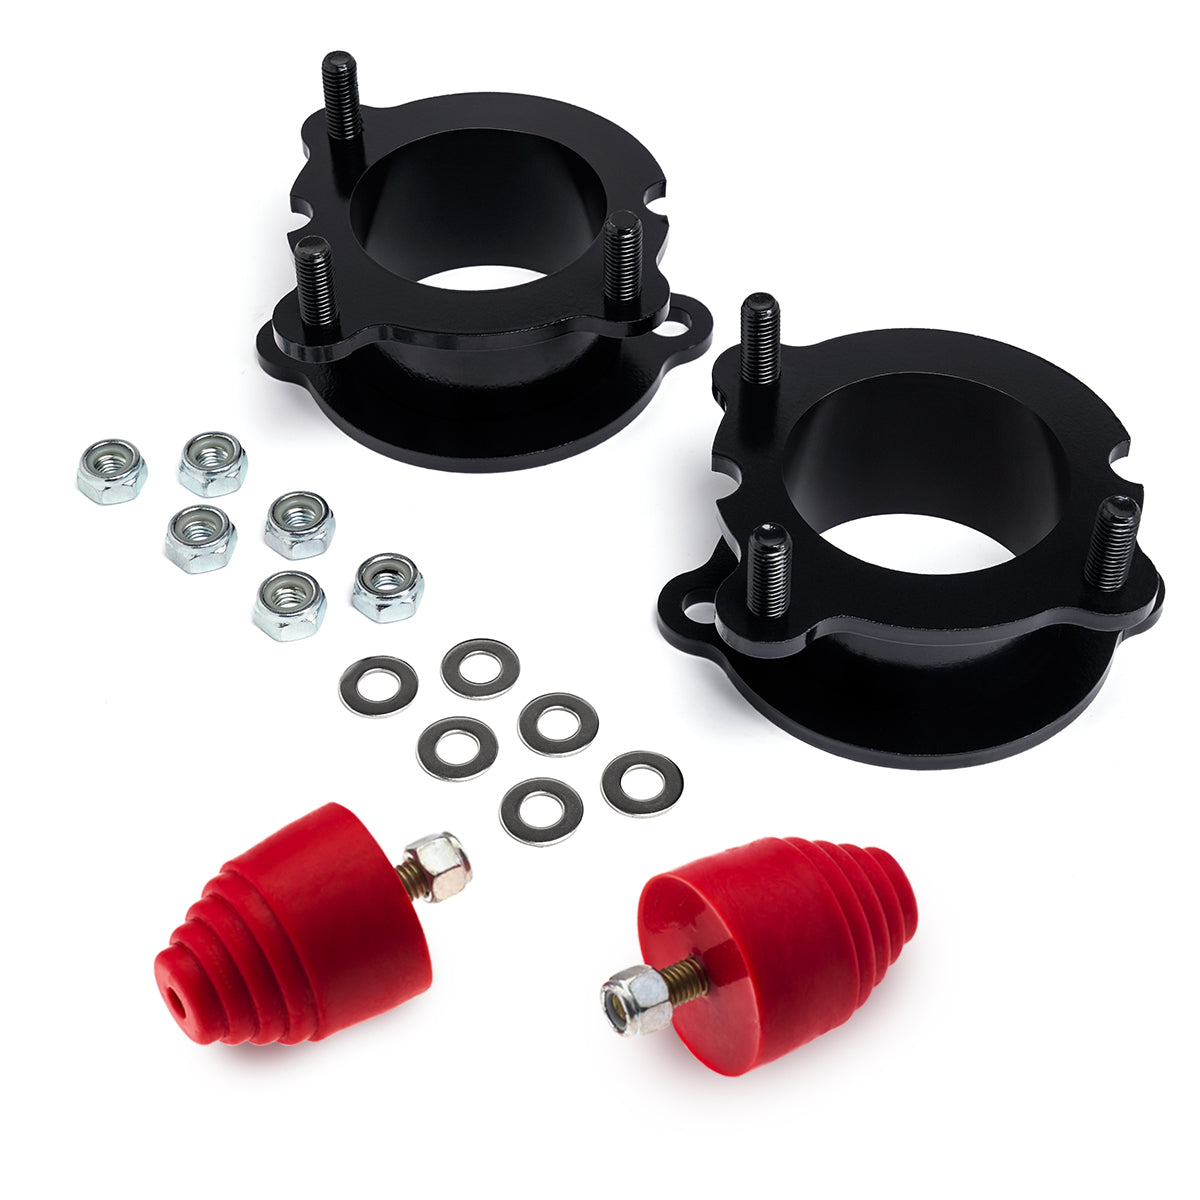 2002-2009 Chevy Trailblazer 2WD 4WD Front Lift Kit with Bump Stops